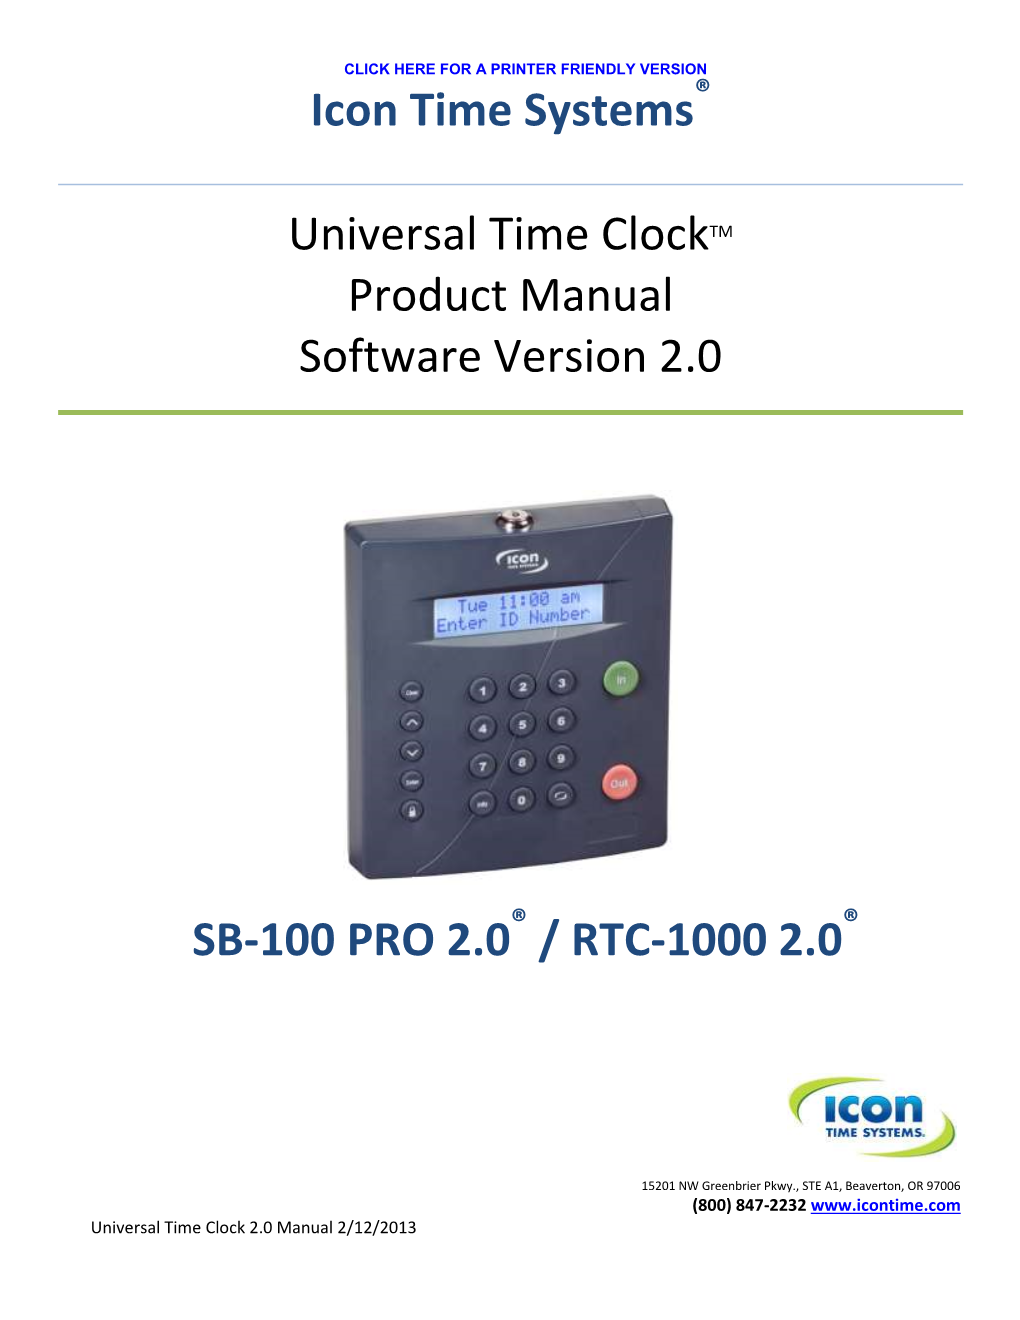 Universal Time Clock User Guide